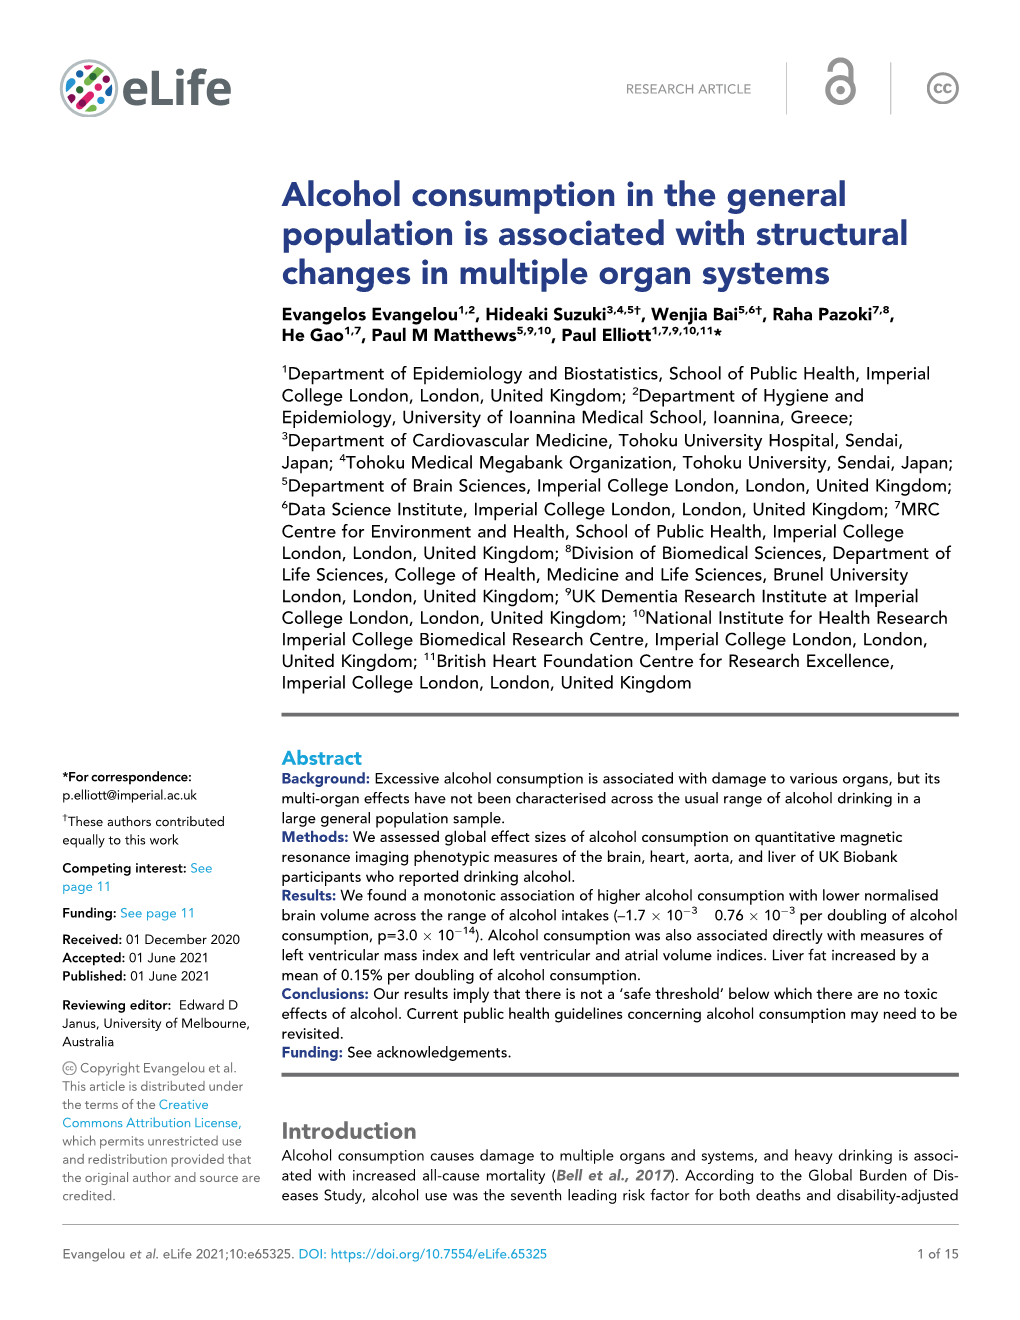 Alcohol Consumption in the General Population Is Associated With